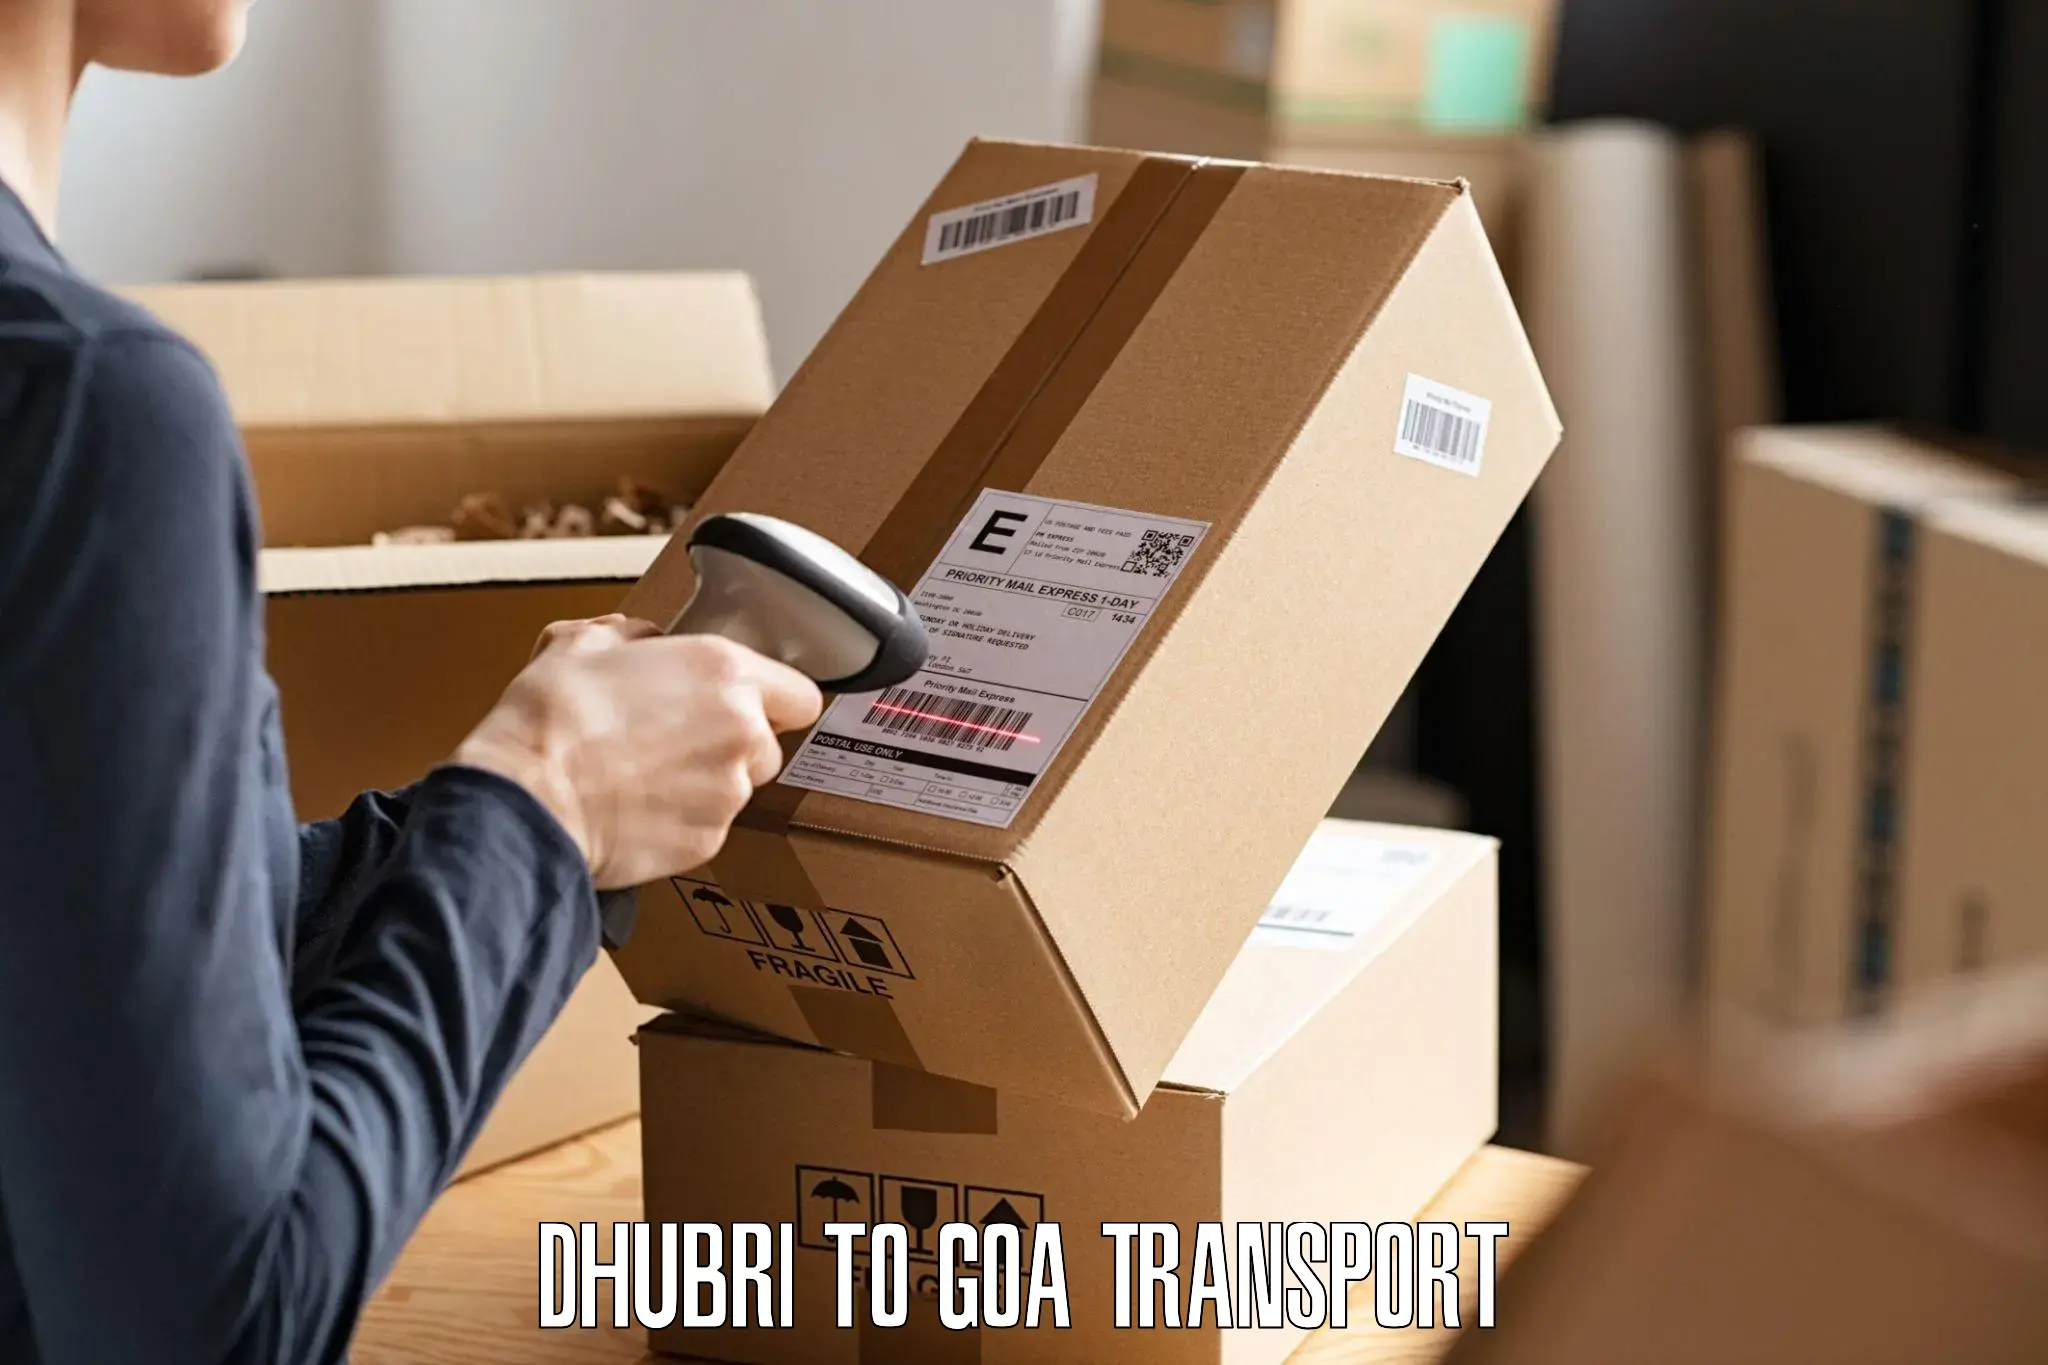 Daily transport service Dhubri to Goa